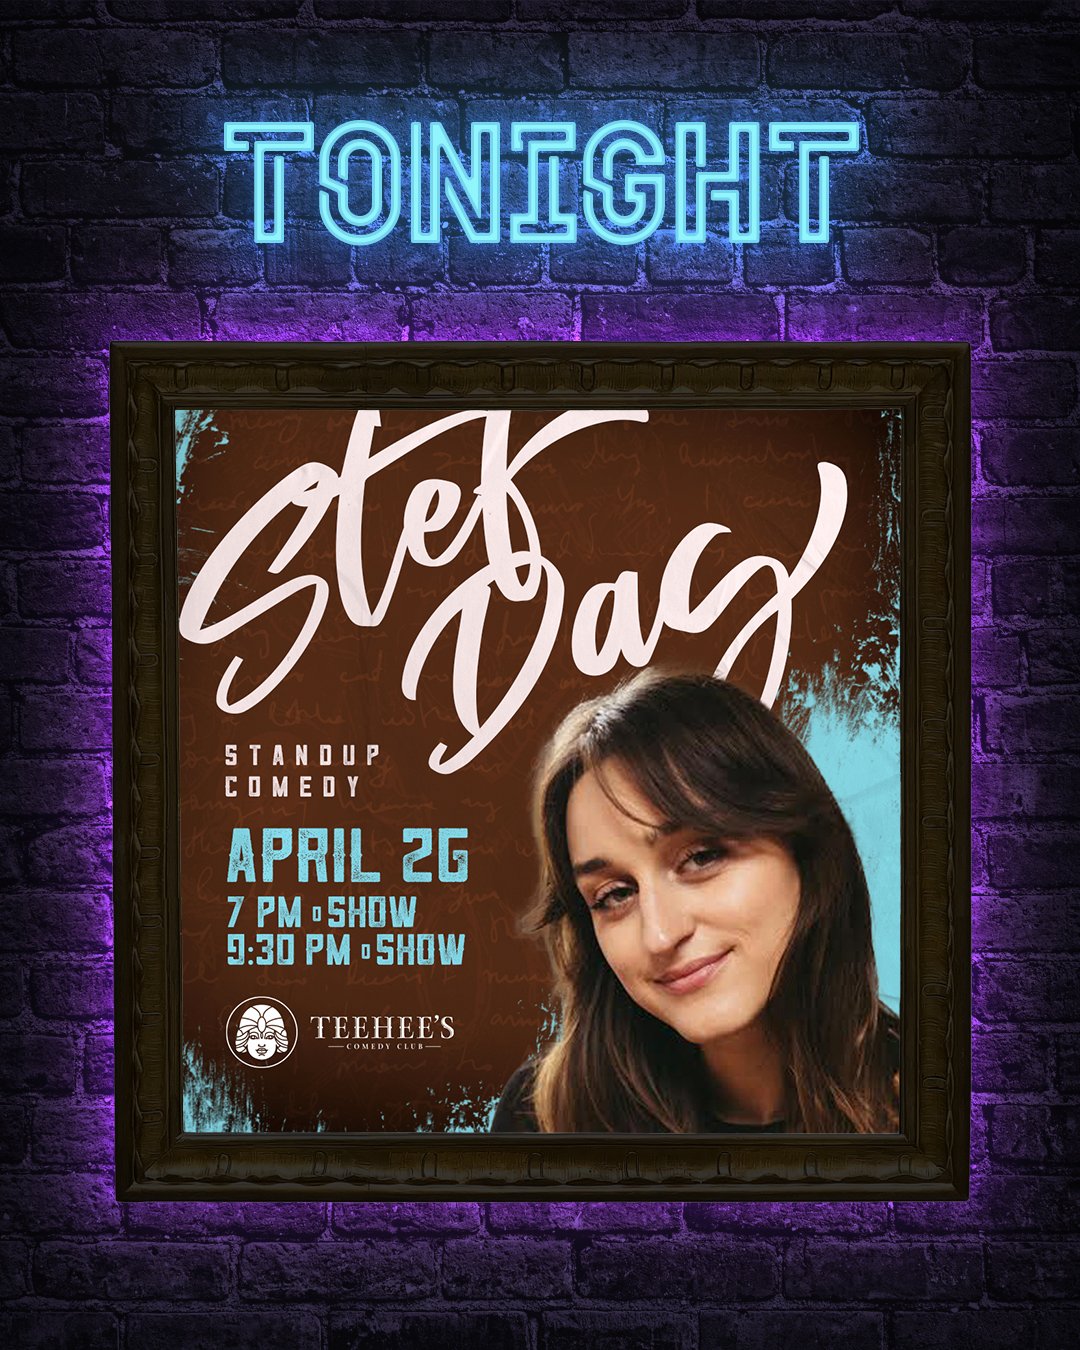 🔥🎤🔥 Tonight! Stef Dag takes over the club for 2 shows!
Get 🎟🎟🎟 at teeheescomedy.com/shows